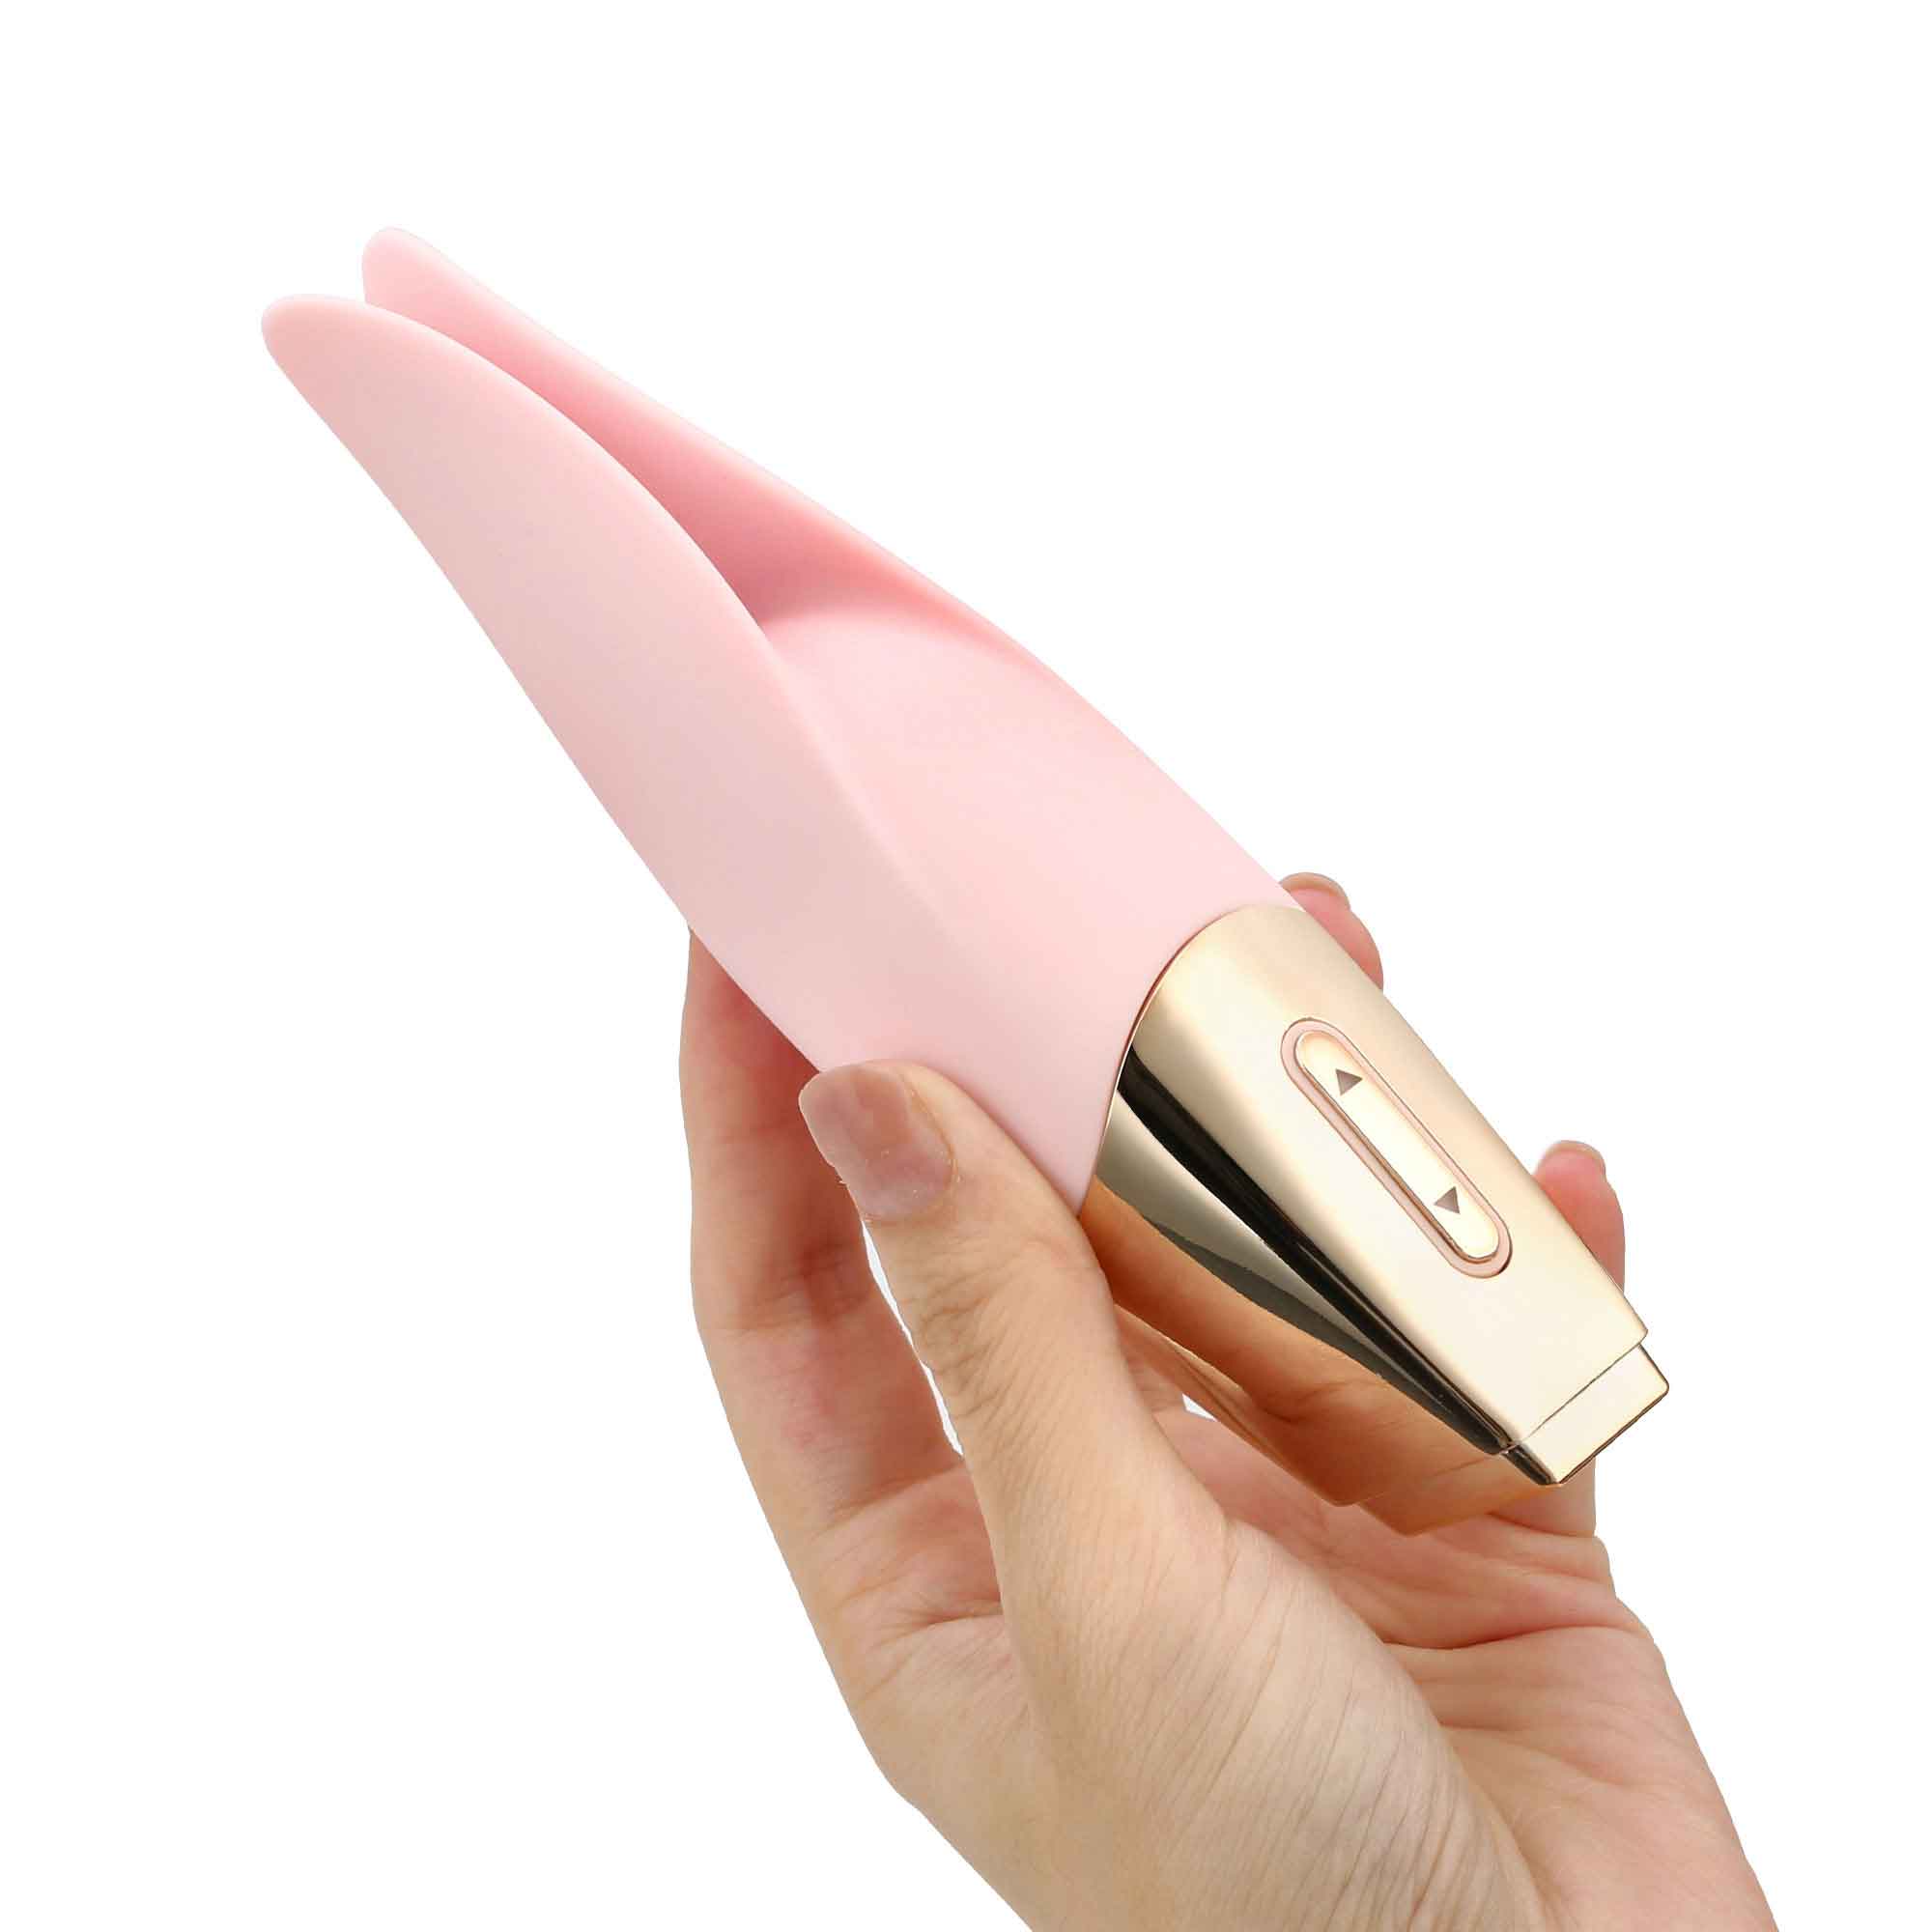 Speedo Tongue Rechargeable Rabbit Ears Clitoral and Nipple Vibrator BF-13074-04